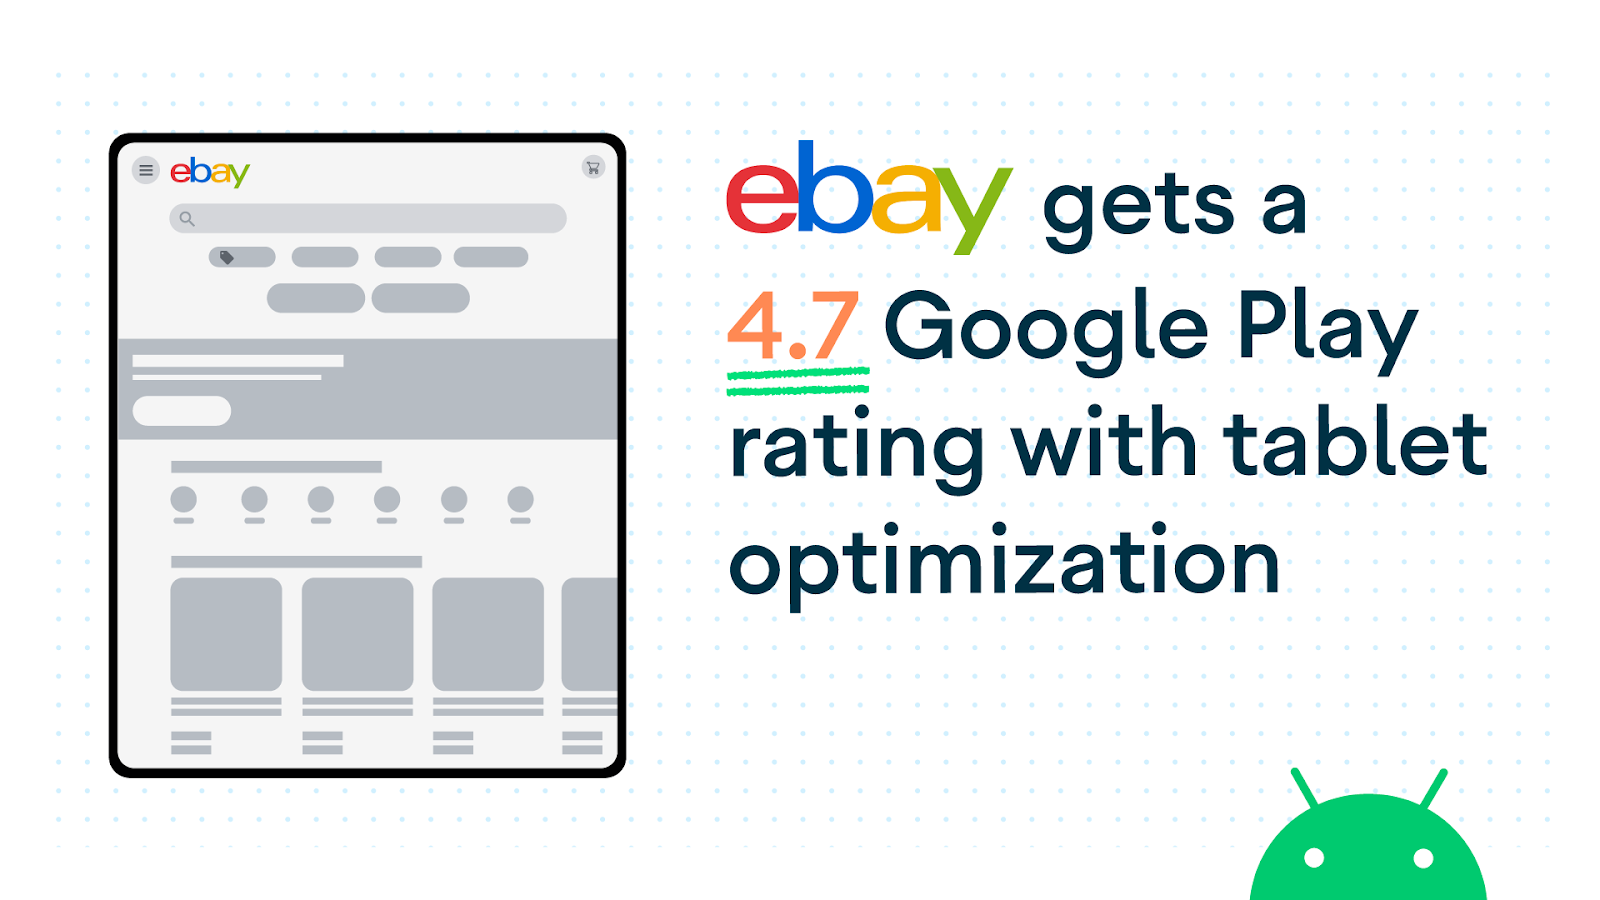 eBay gets a 4.7 Google Play rating with tablet optimizations